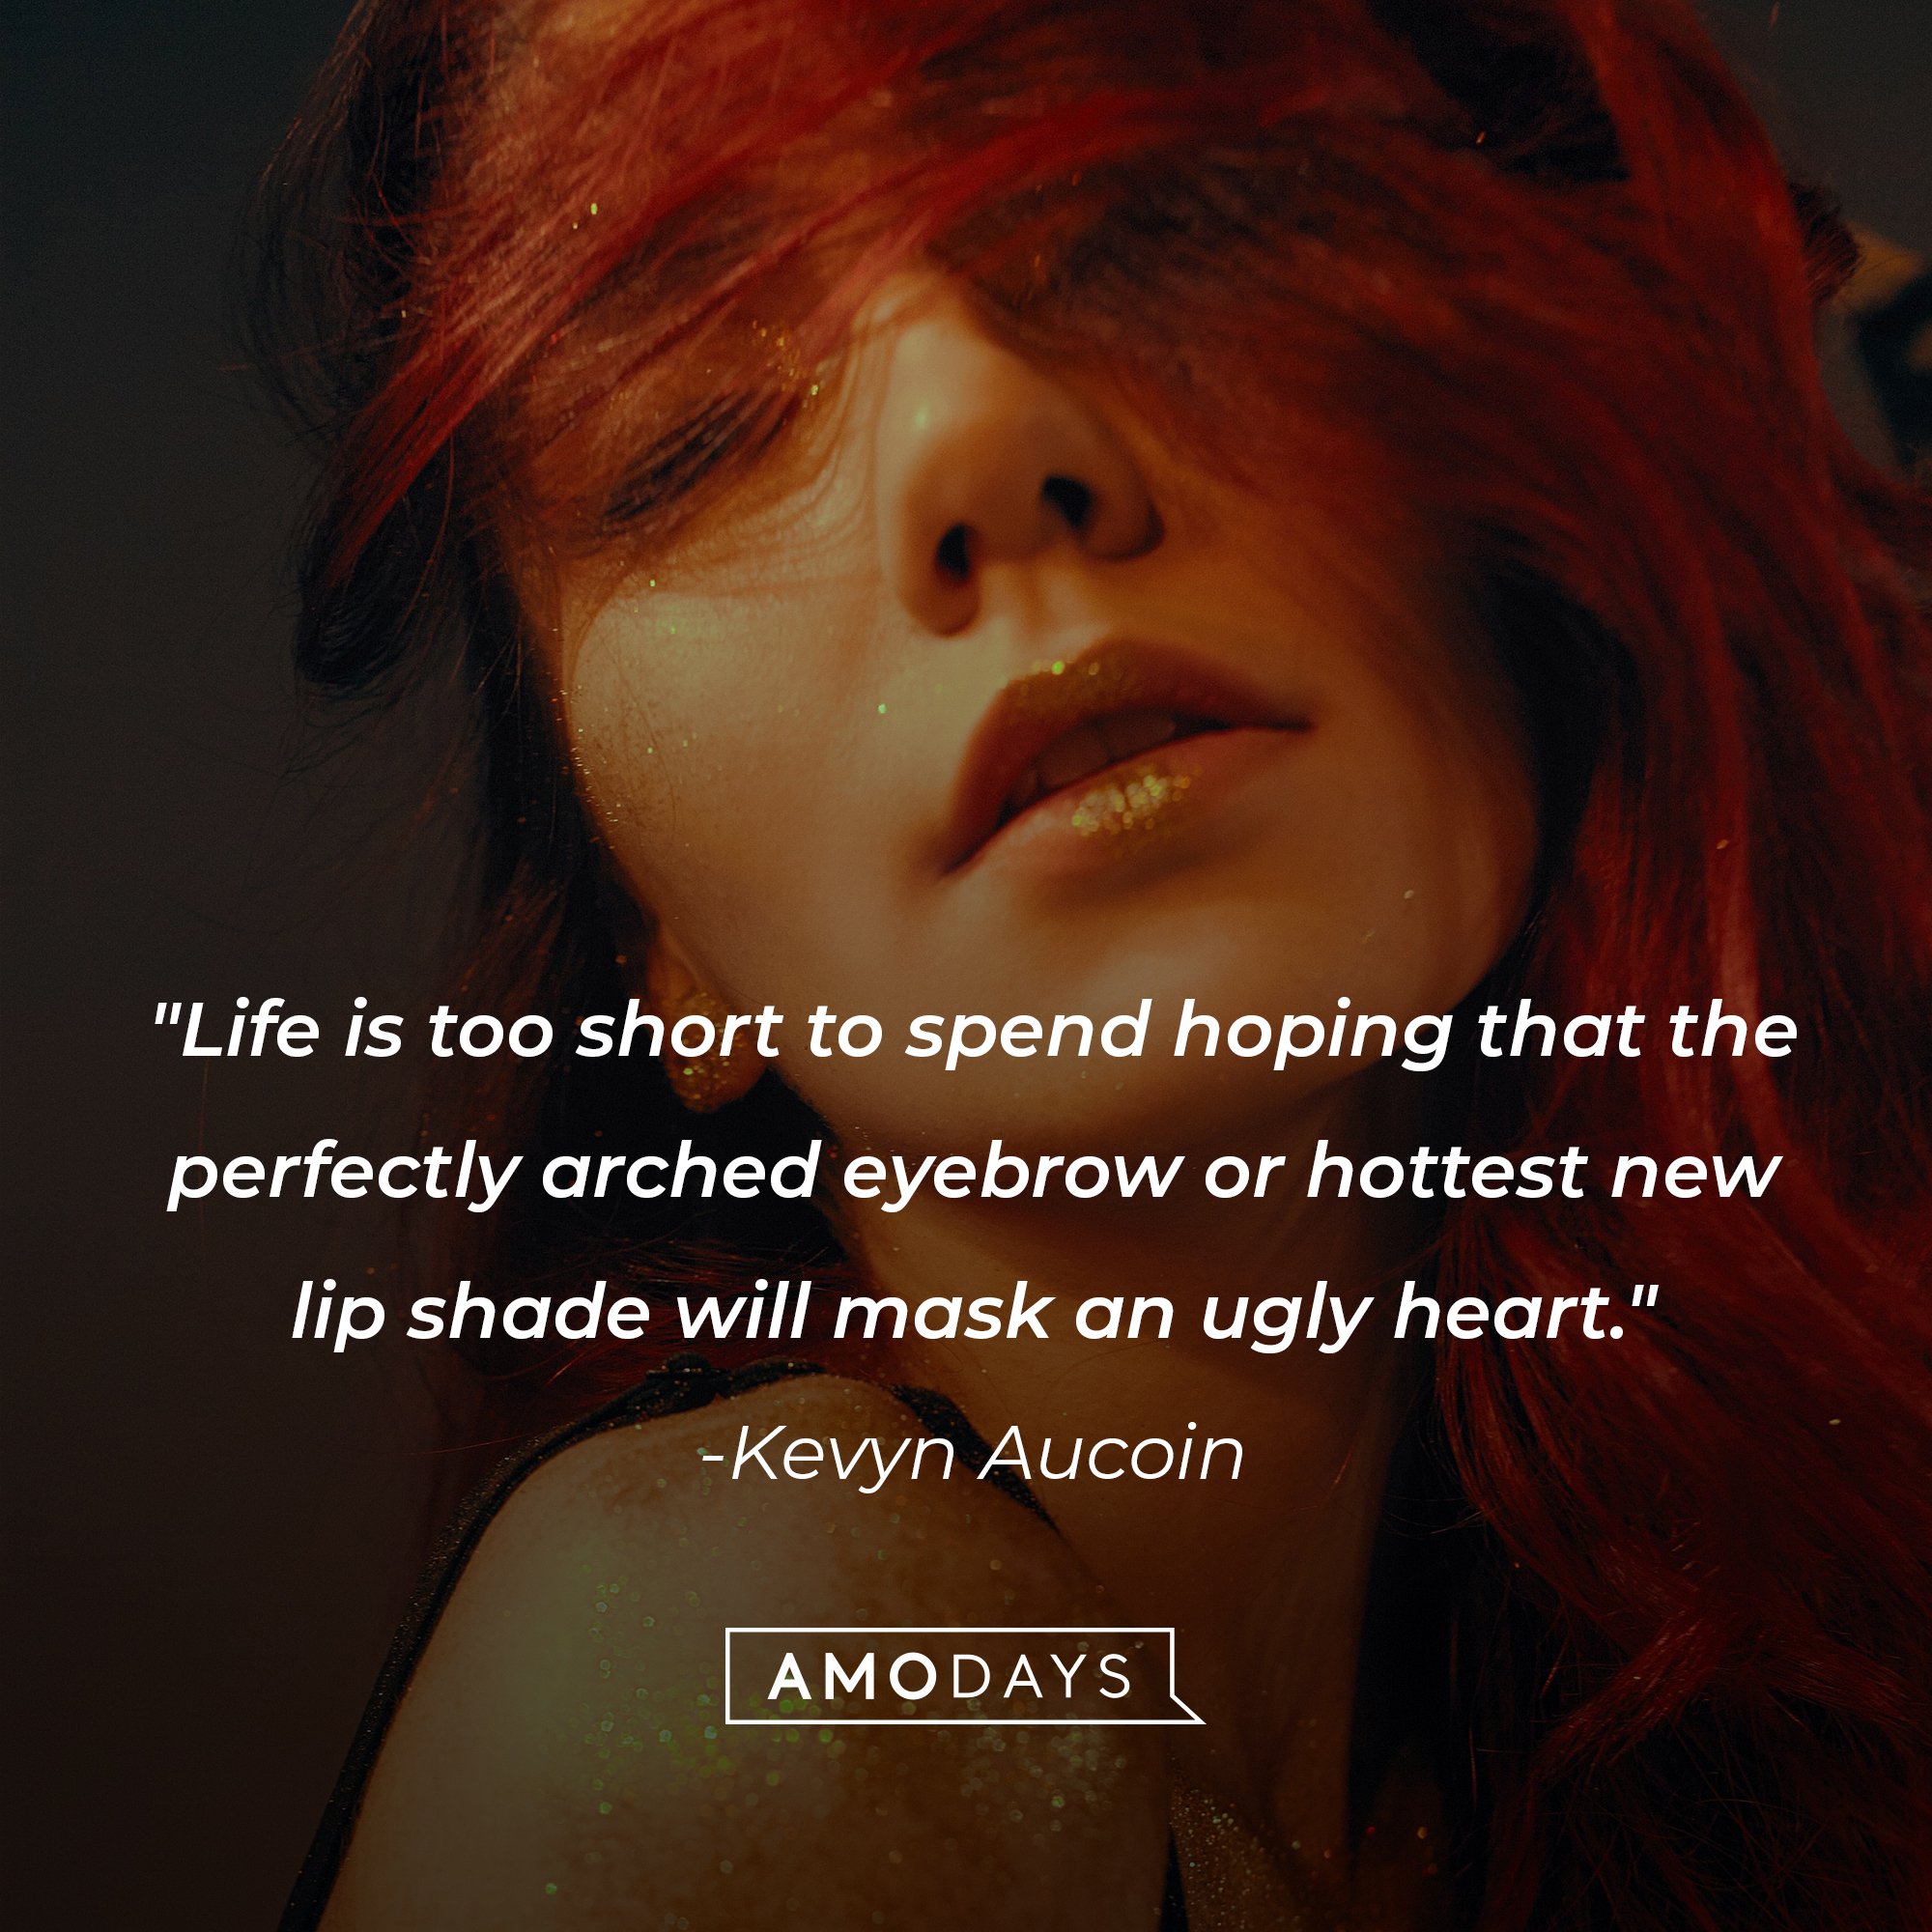 Kevyn Aucoin’s quote: "Life is too short to spend hoping that the perfectly arched eyebrow or hottest new lip shade will mask an ugly heart." | Image: AmoDays  